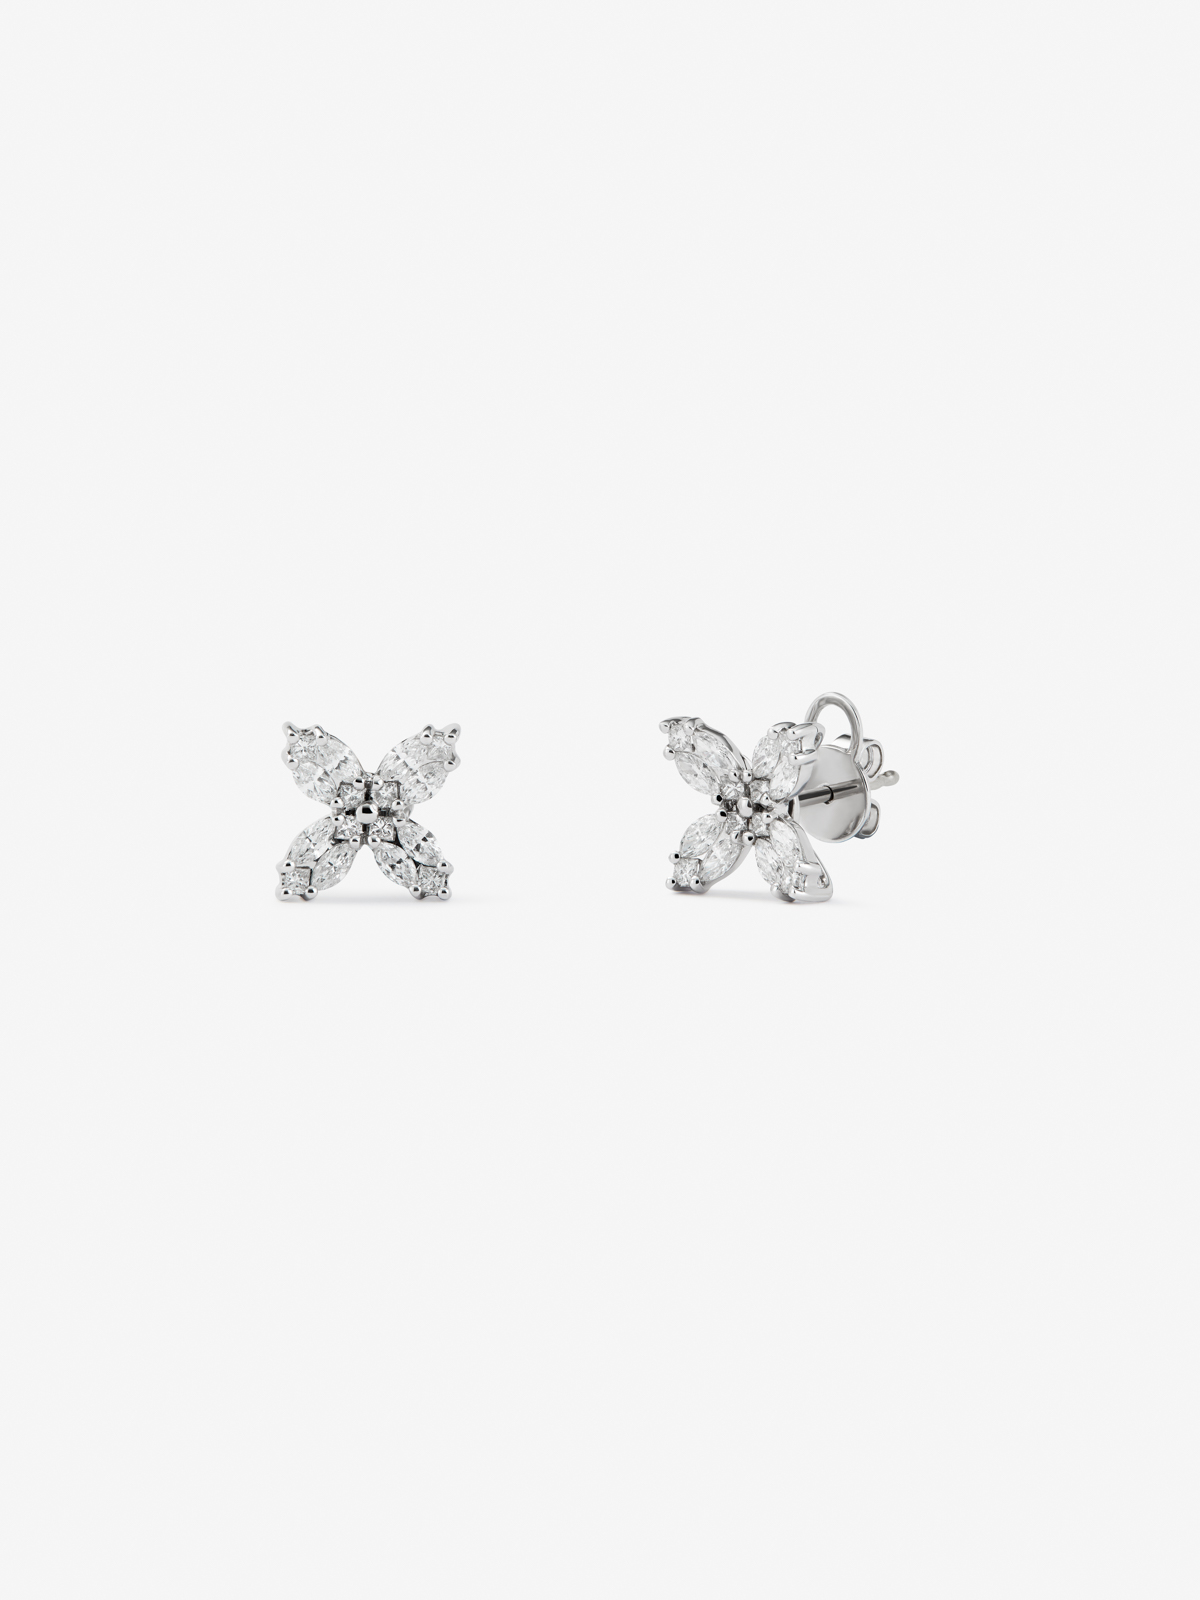 18K white gold earrings with 0.86 ct brilliant cut diamonds